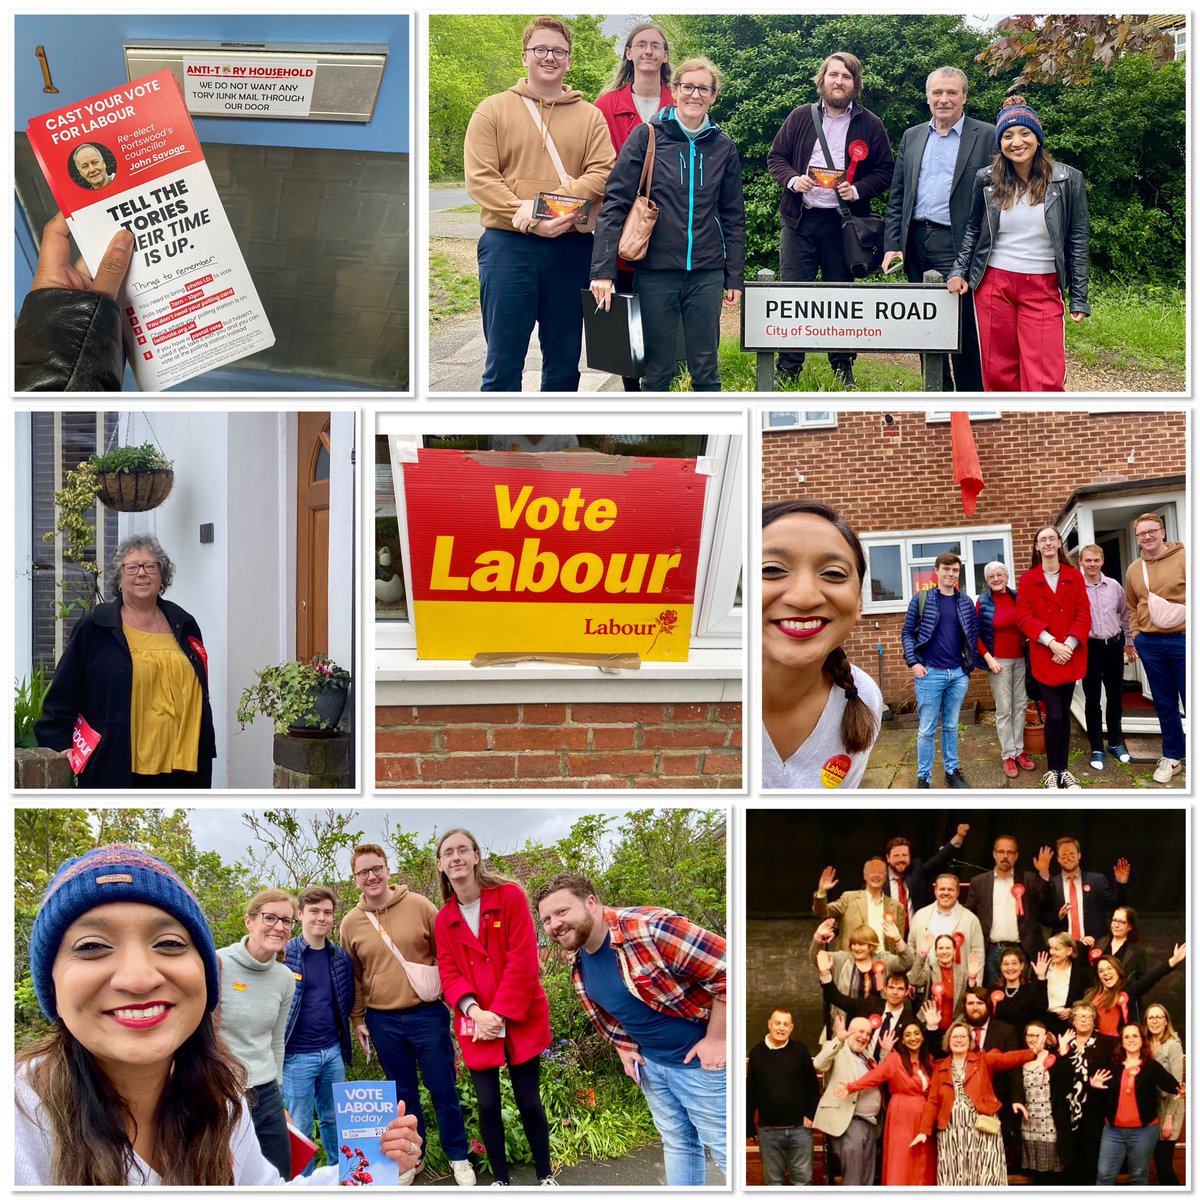 HUGE THANK YOU to everyone that voted & campaigned for Labour in Southampton in these local elections. Because of you, we re-elected some dedicated & passionate councillors - who will continue to work tirelessly for you & our city. Now let’s bring on the General Election! 🌹🙏🏾